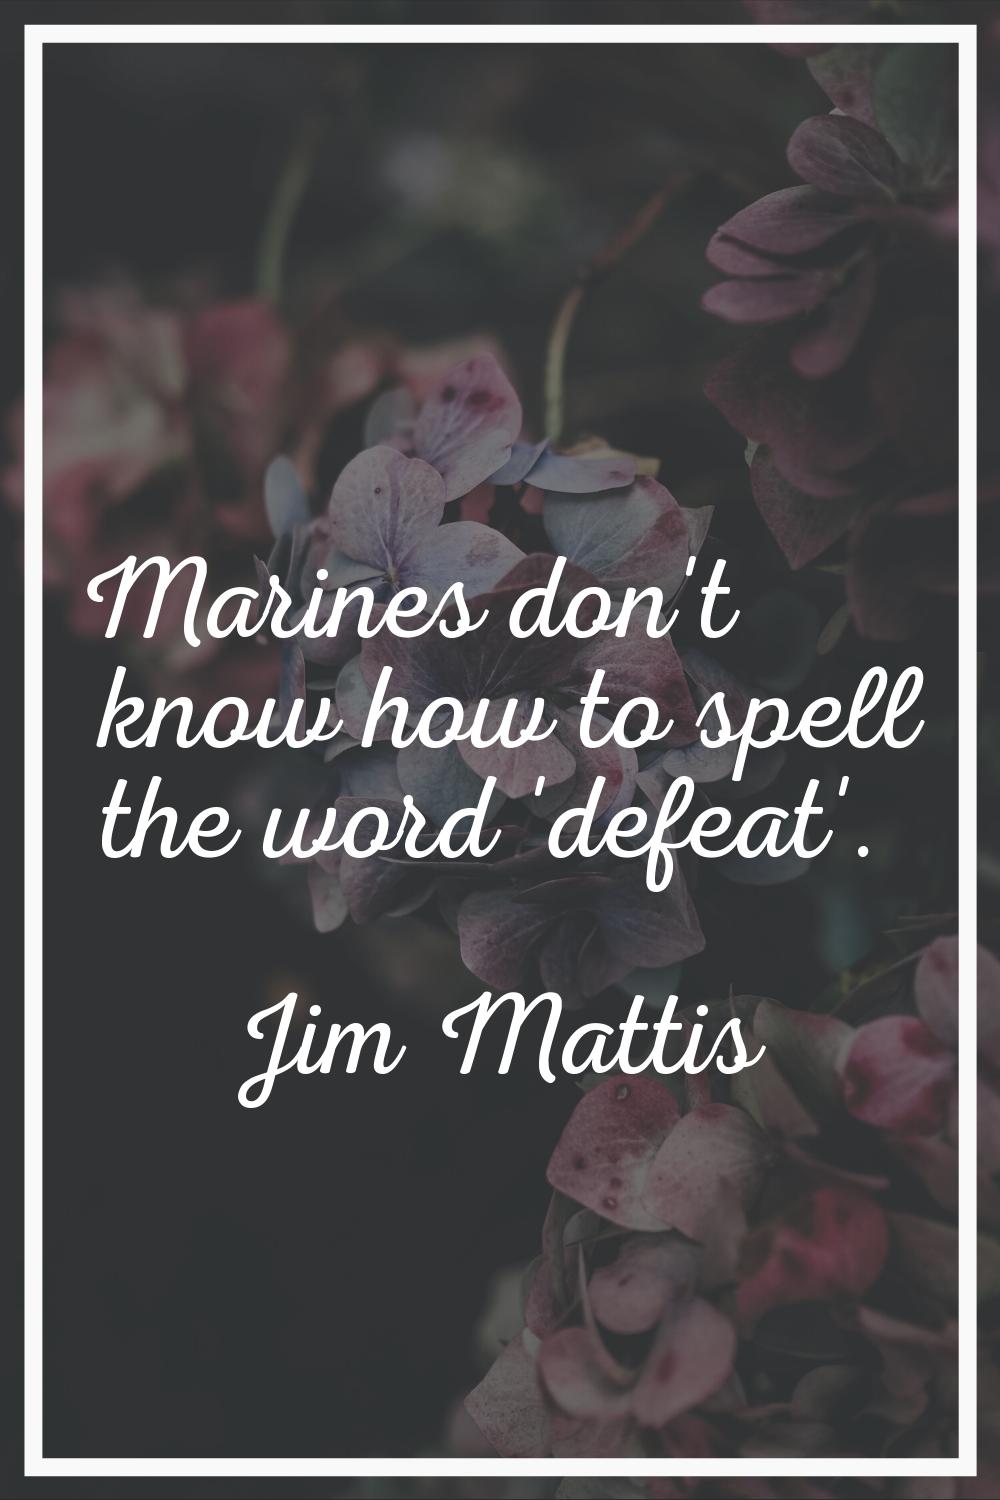 Marines don't know how to spell the word 'defeat'.